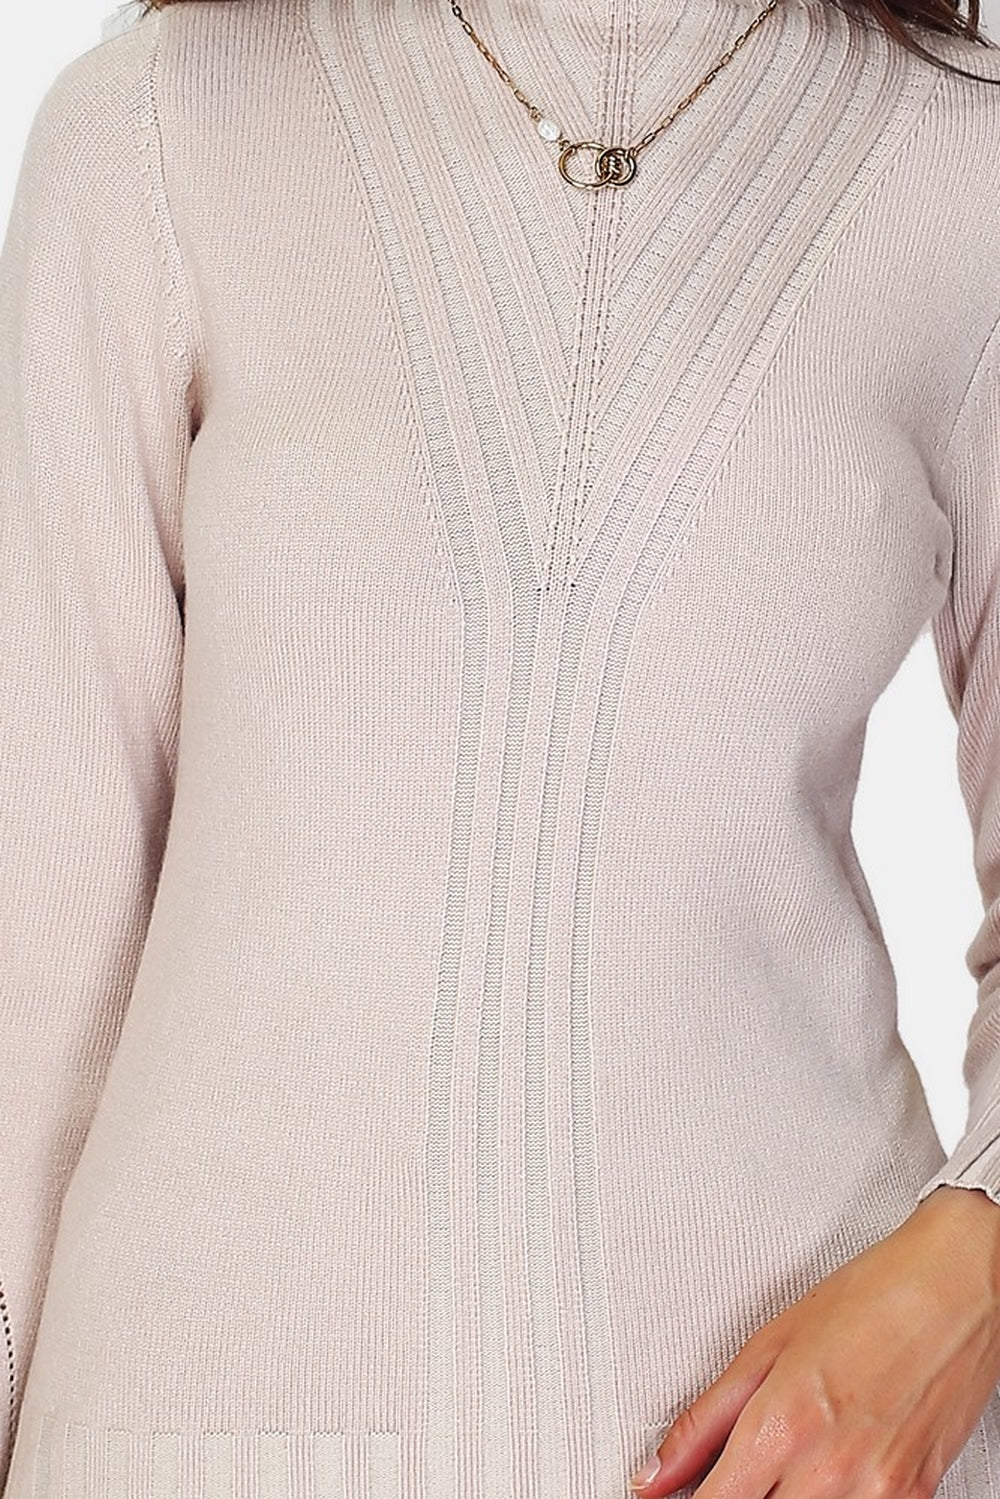 High neck jumper, fancy knit on the front with long sleeves